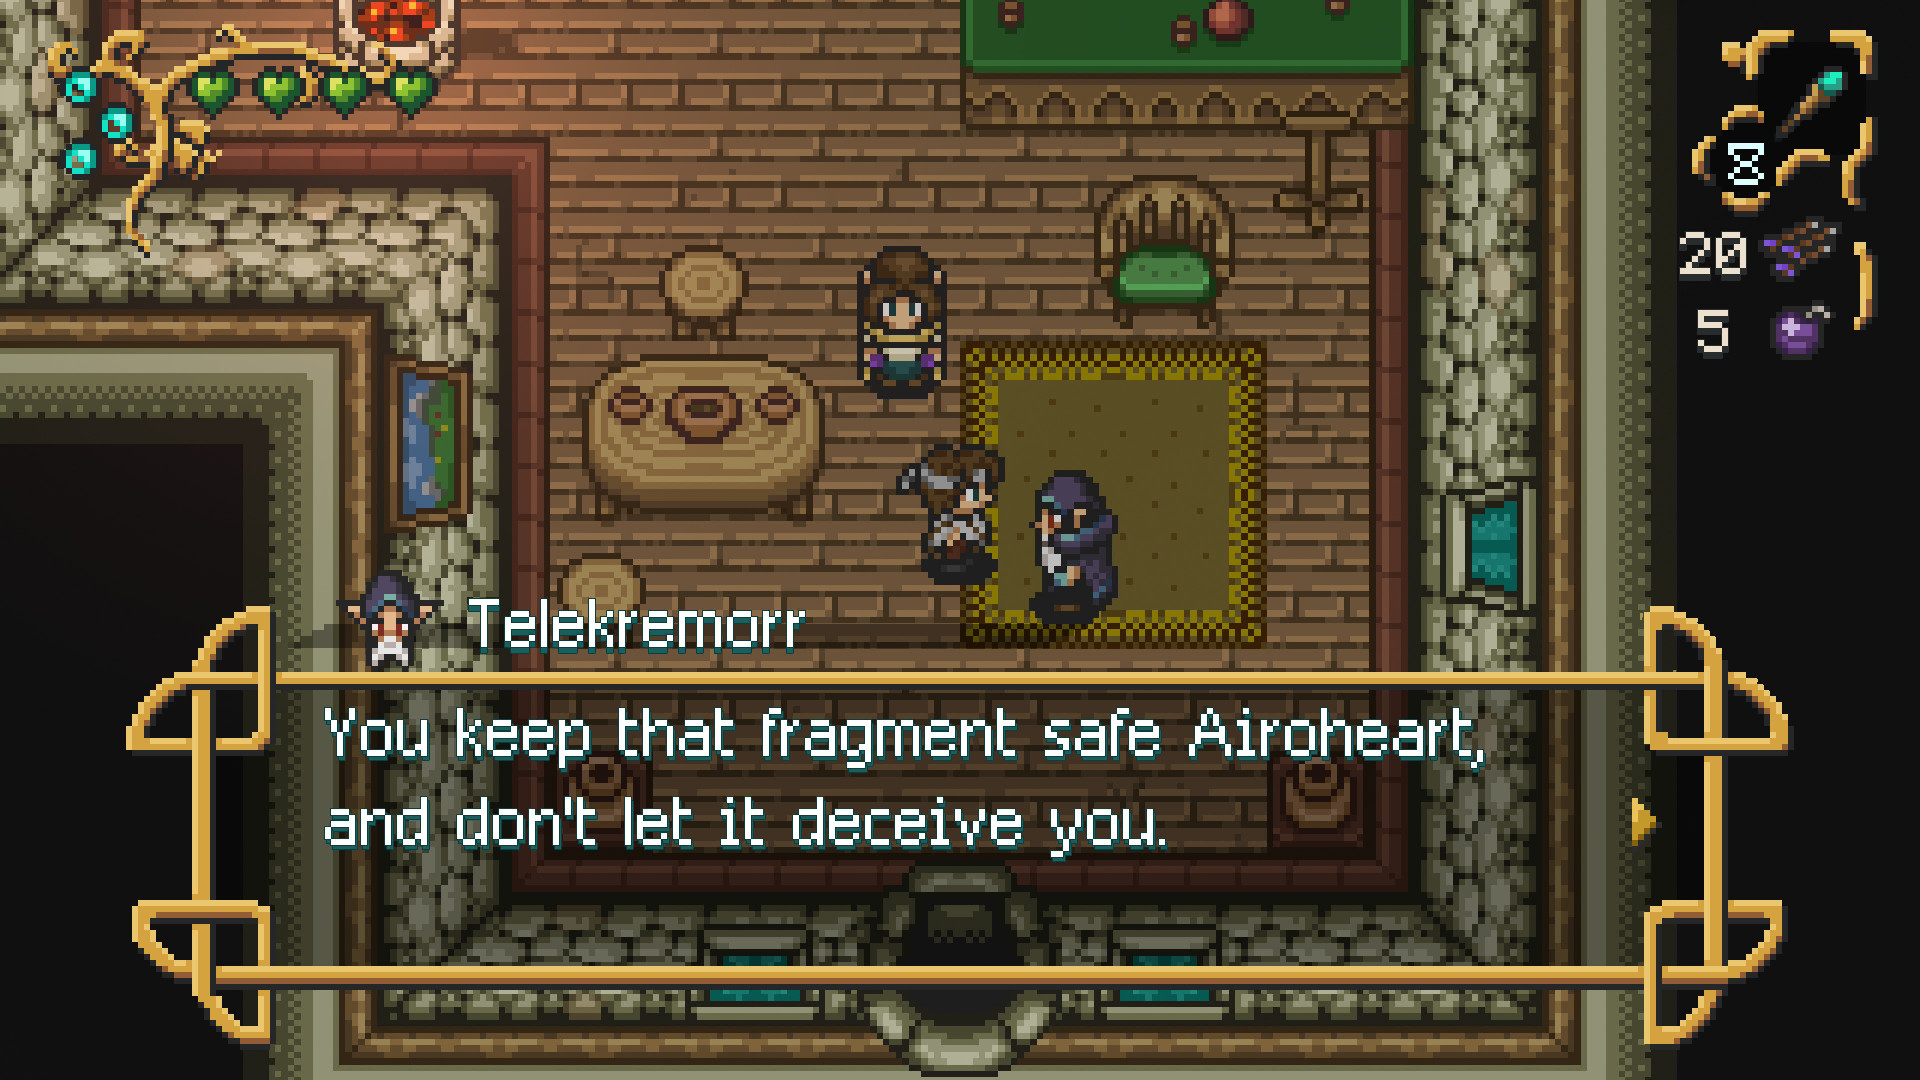 Airoheart download the new